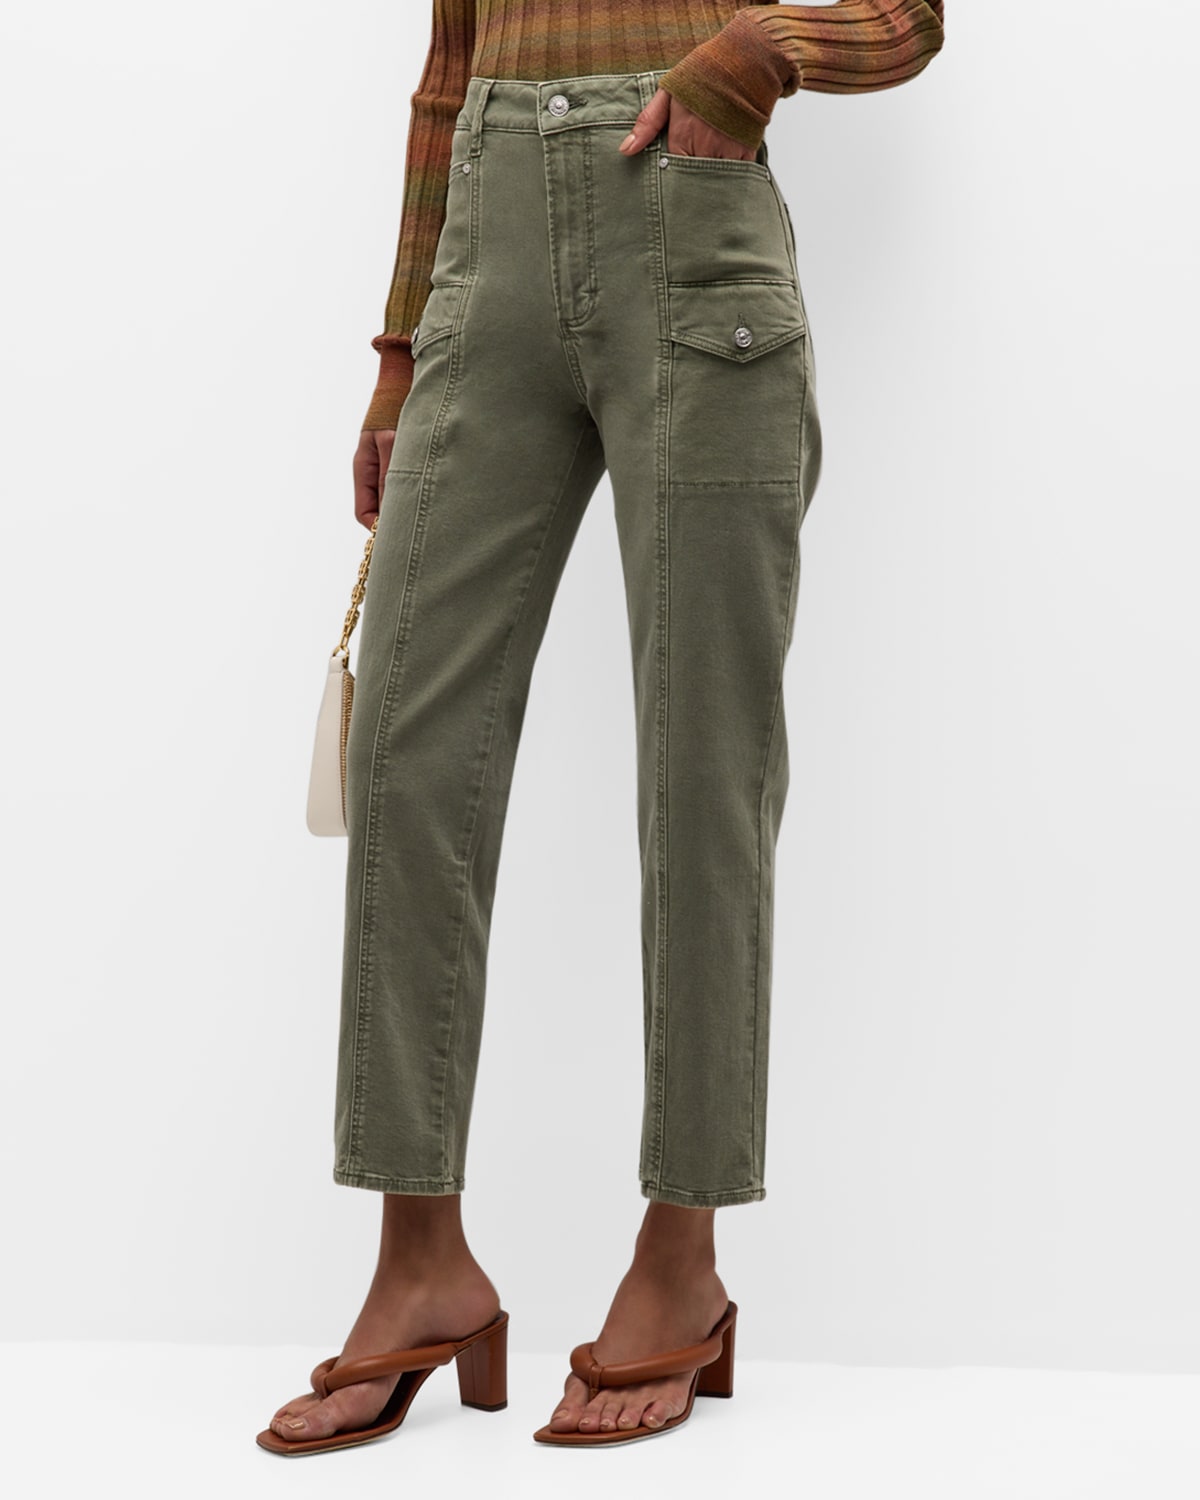 Paige Alexis Cargo Jeans In Vintage Ivy Green